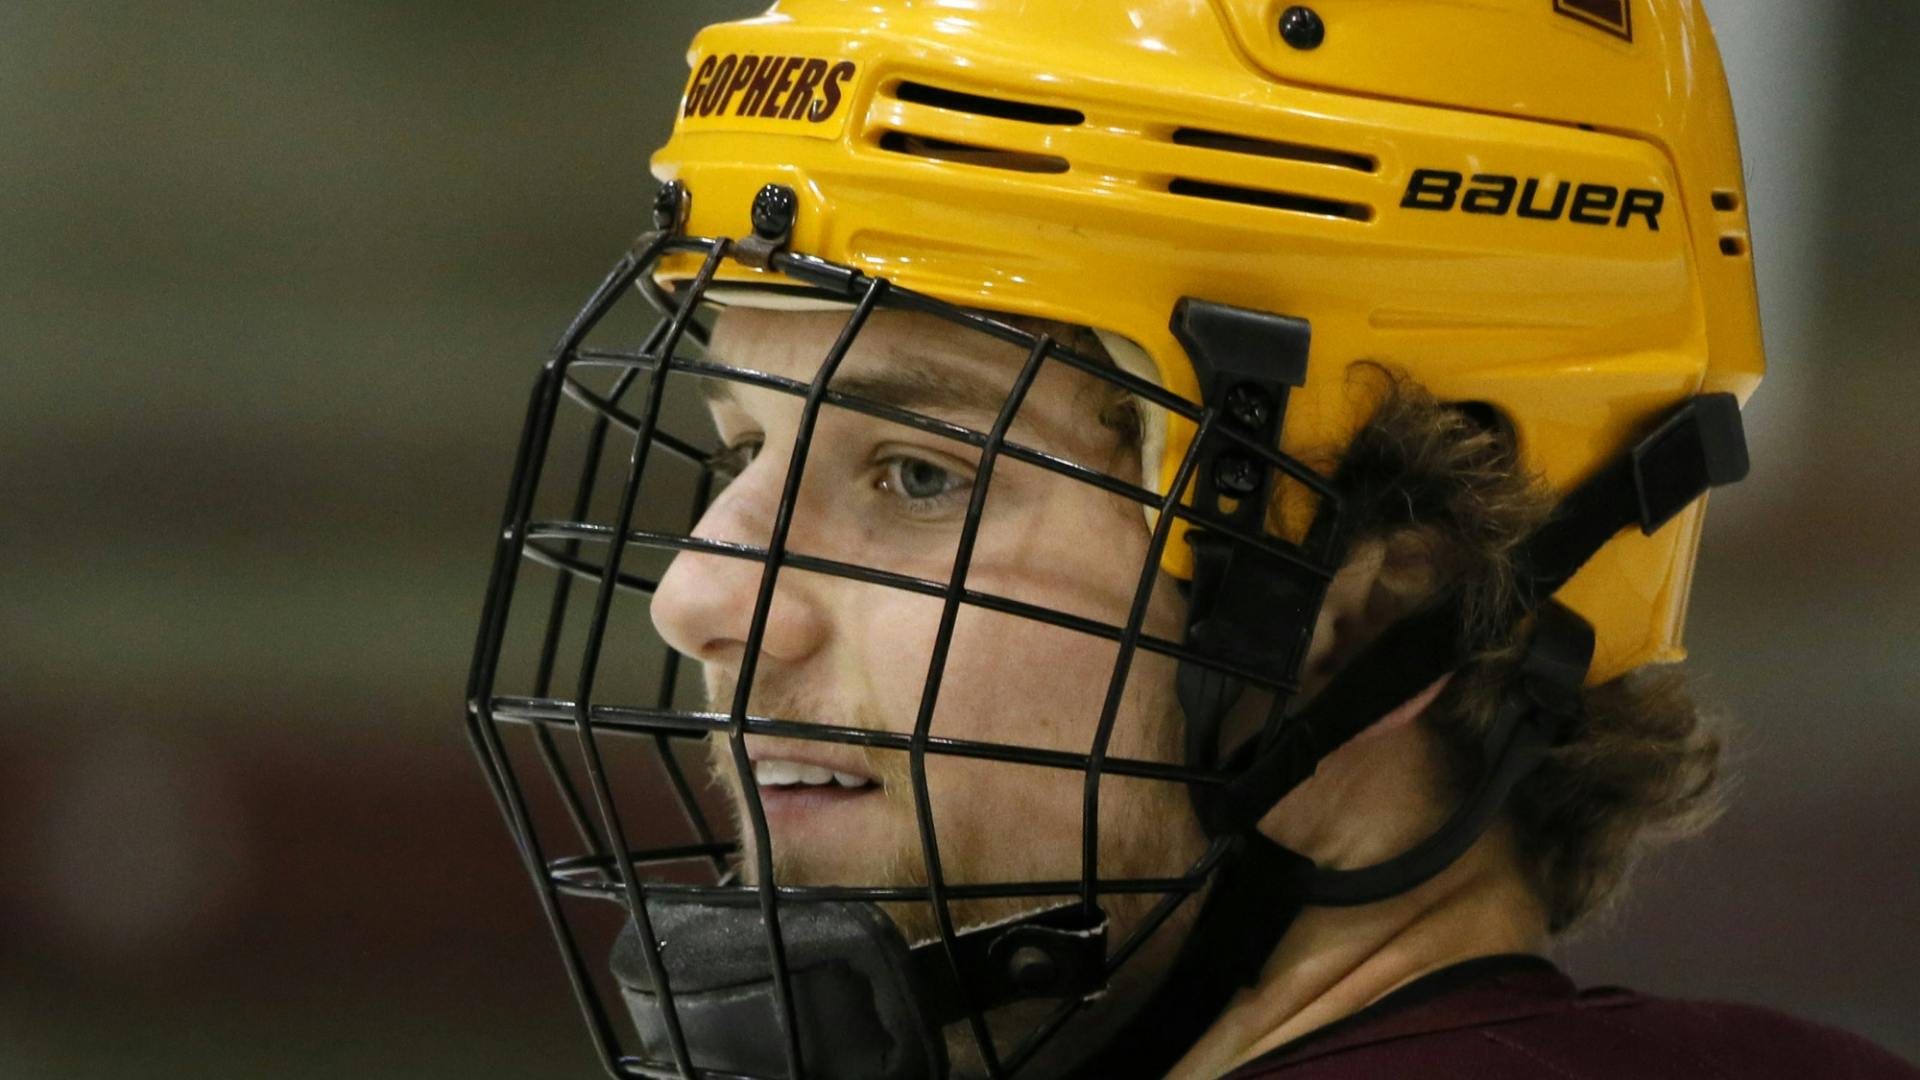 Gophers co-captain Kyle Rau had two assists in Thursday's Frozen Four semifinal, but wants another big finish on Saturday.